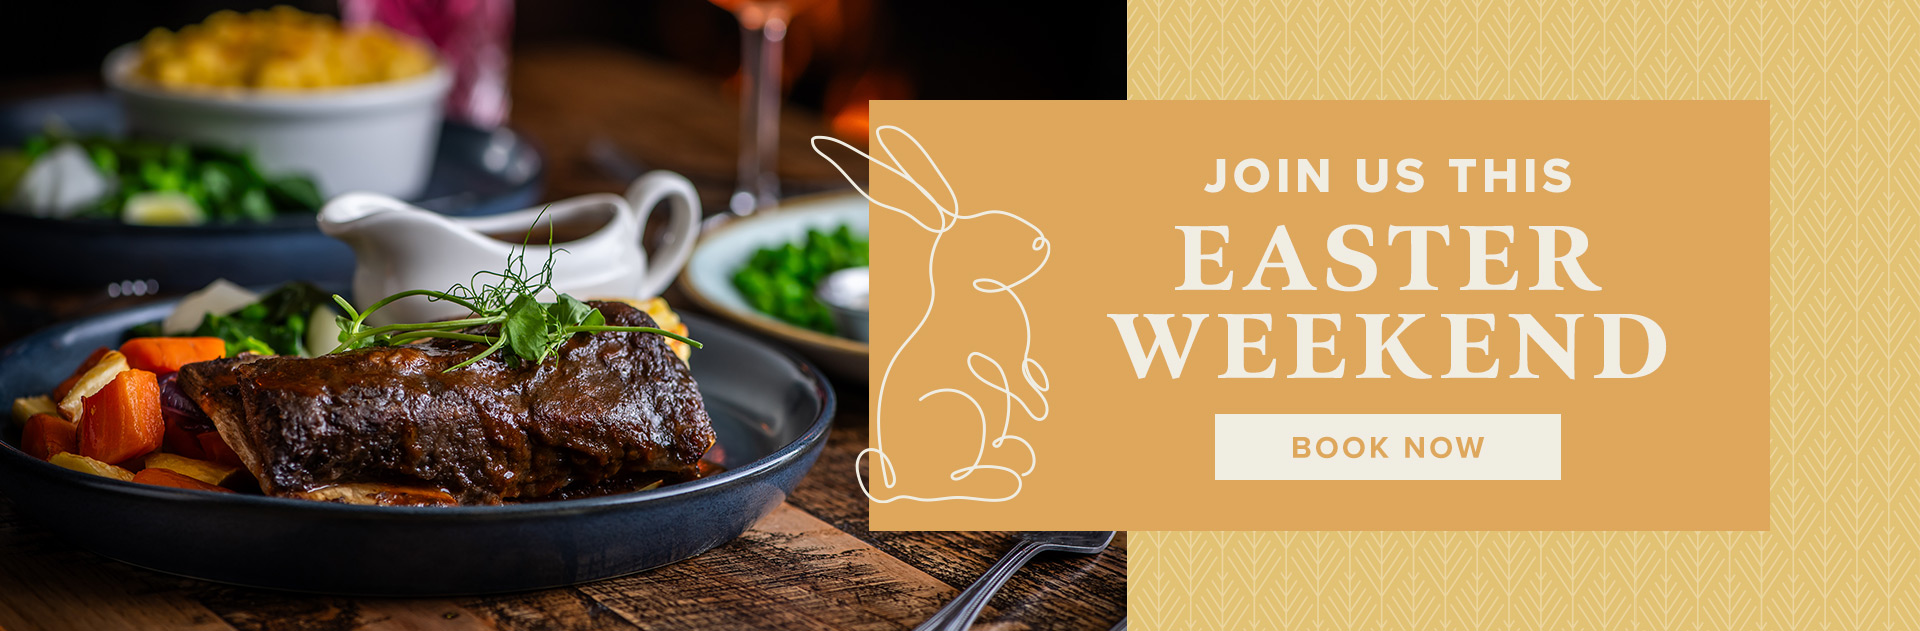 Easter at The Hardwick Arms in Sutton Coldfield